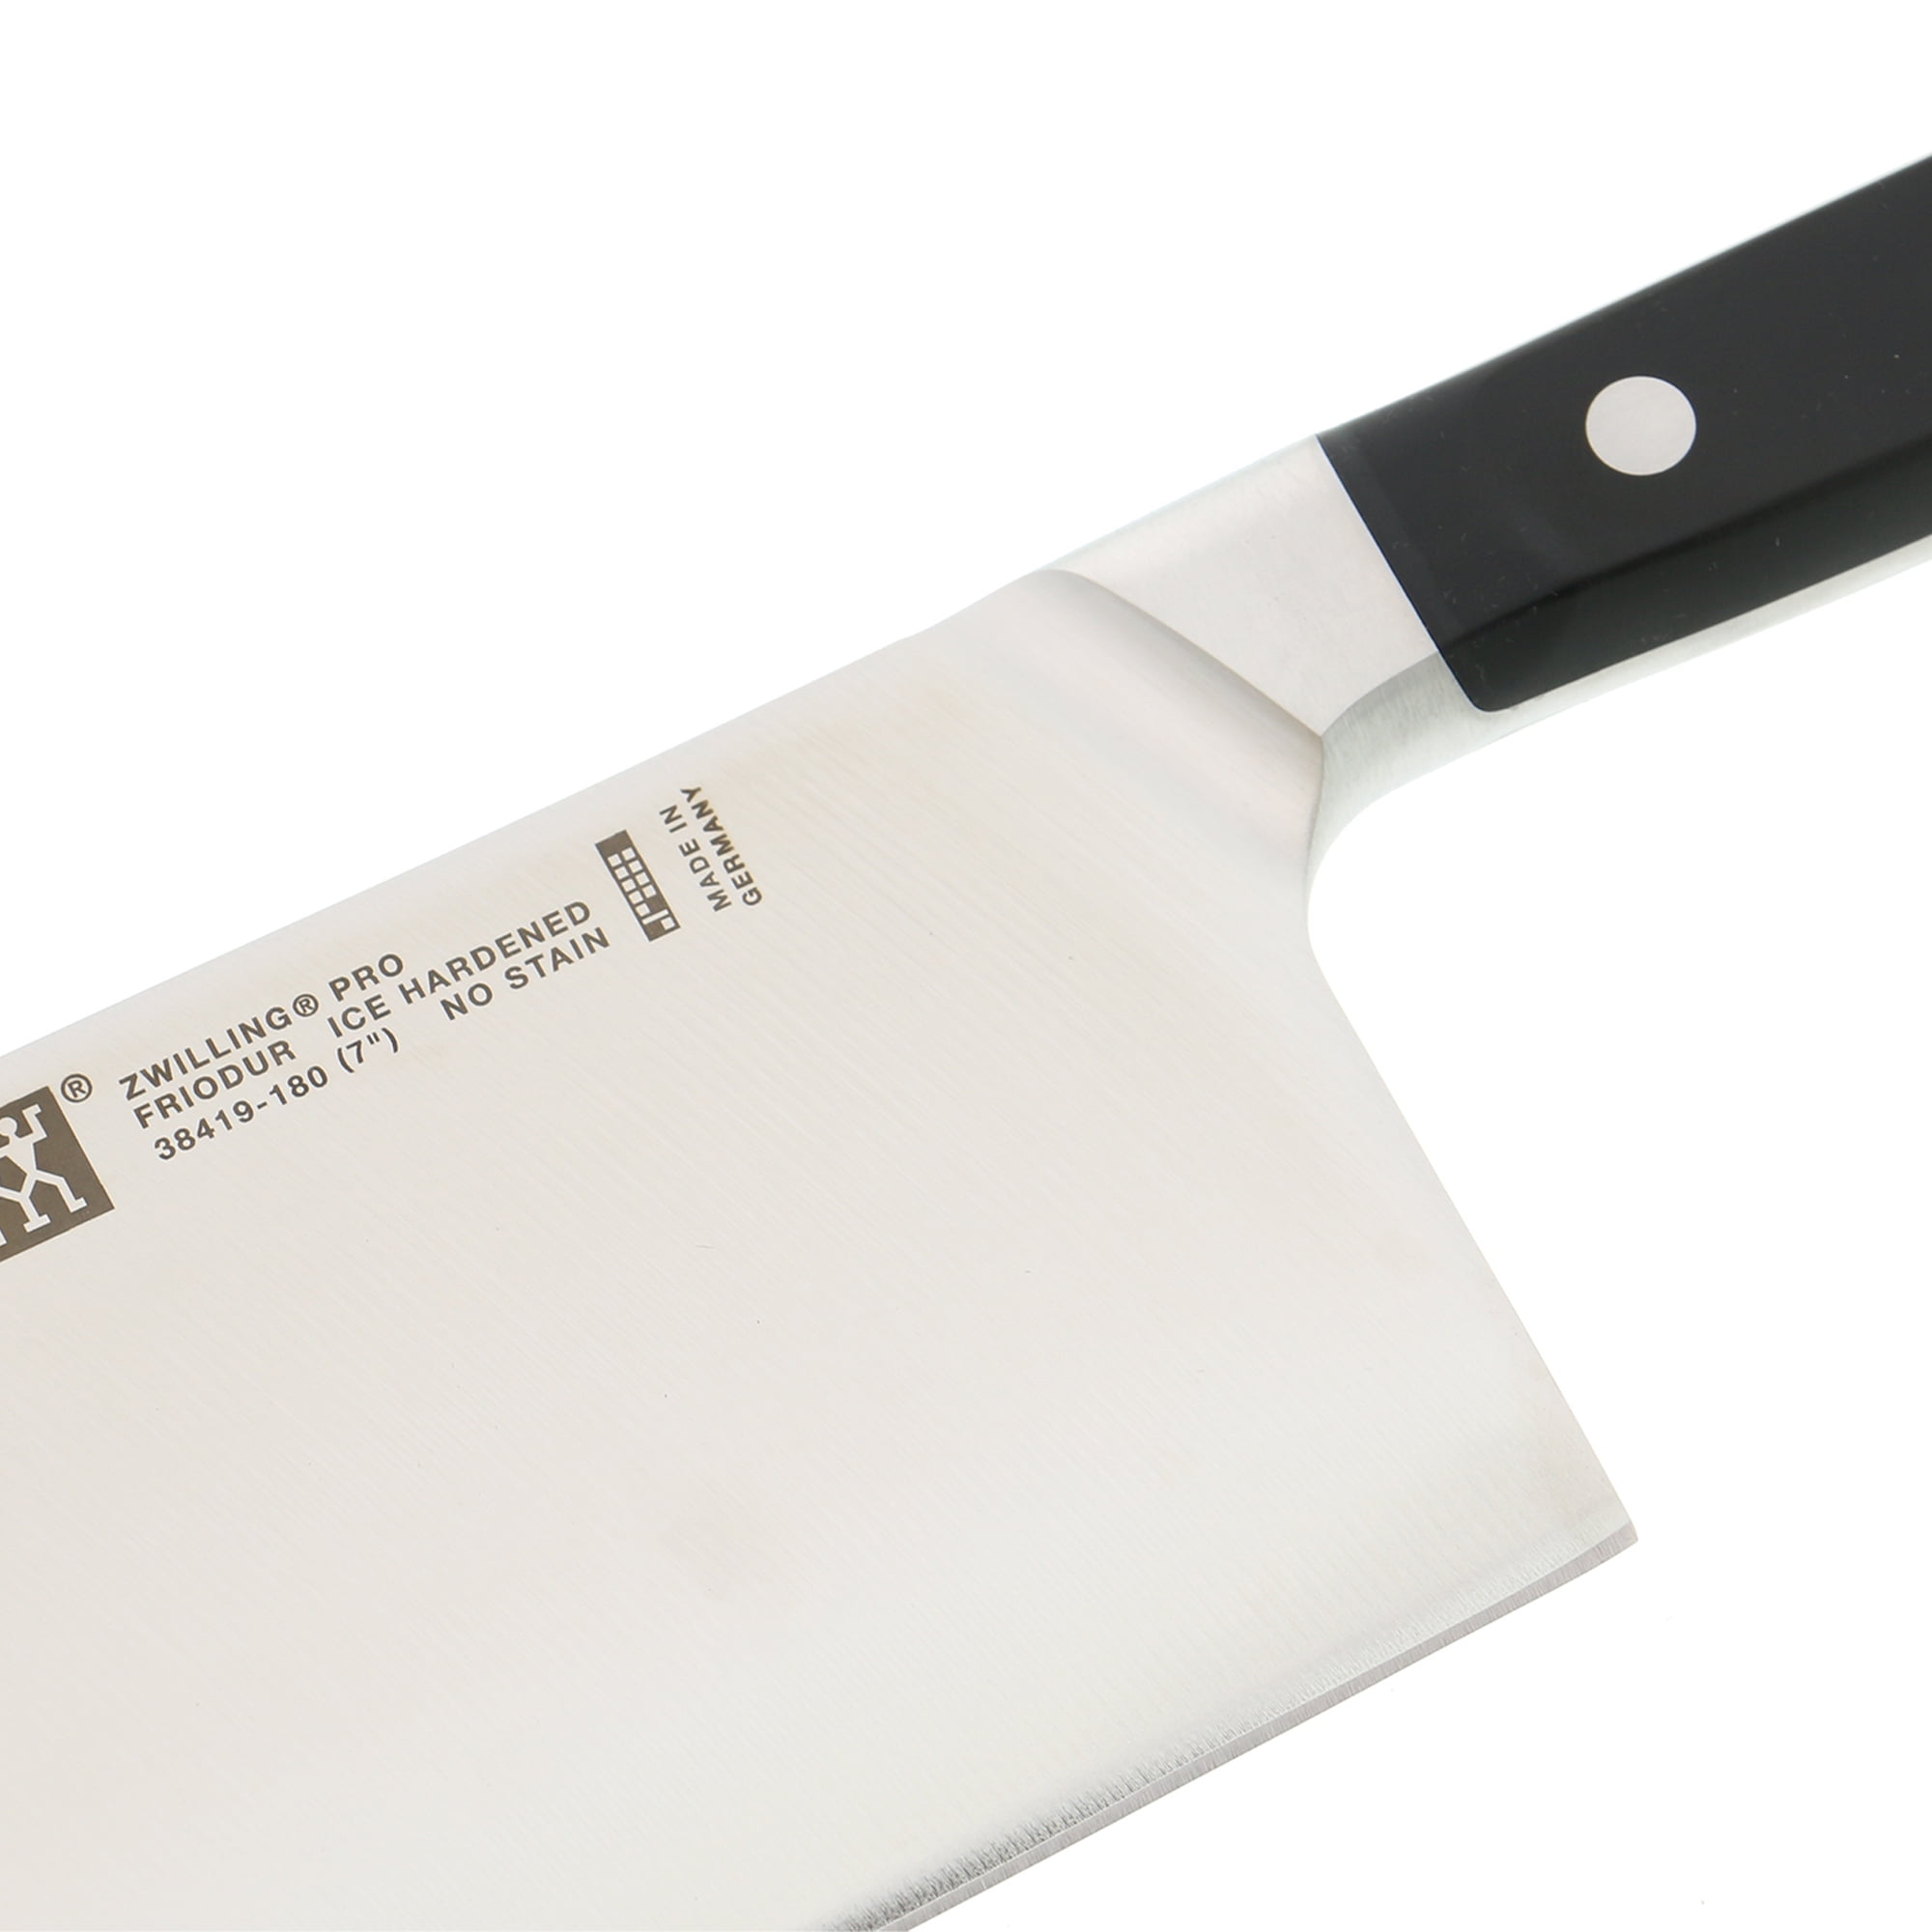 TUO Cutlery - TC0702 - Vegetable Cleaver - Chinese Chef's Knife